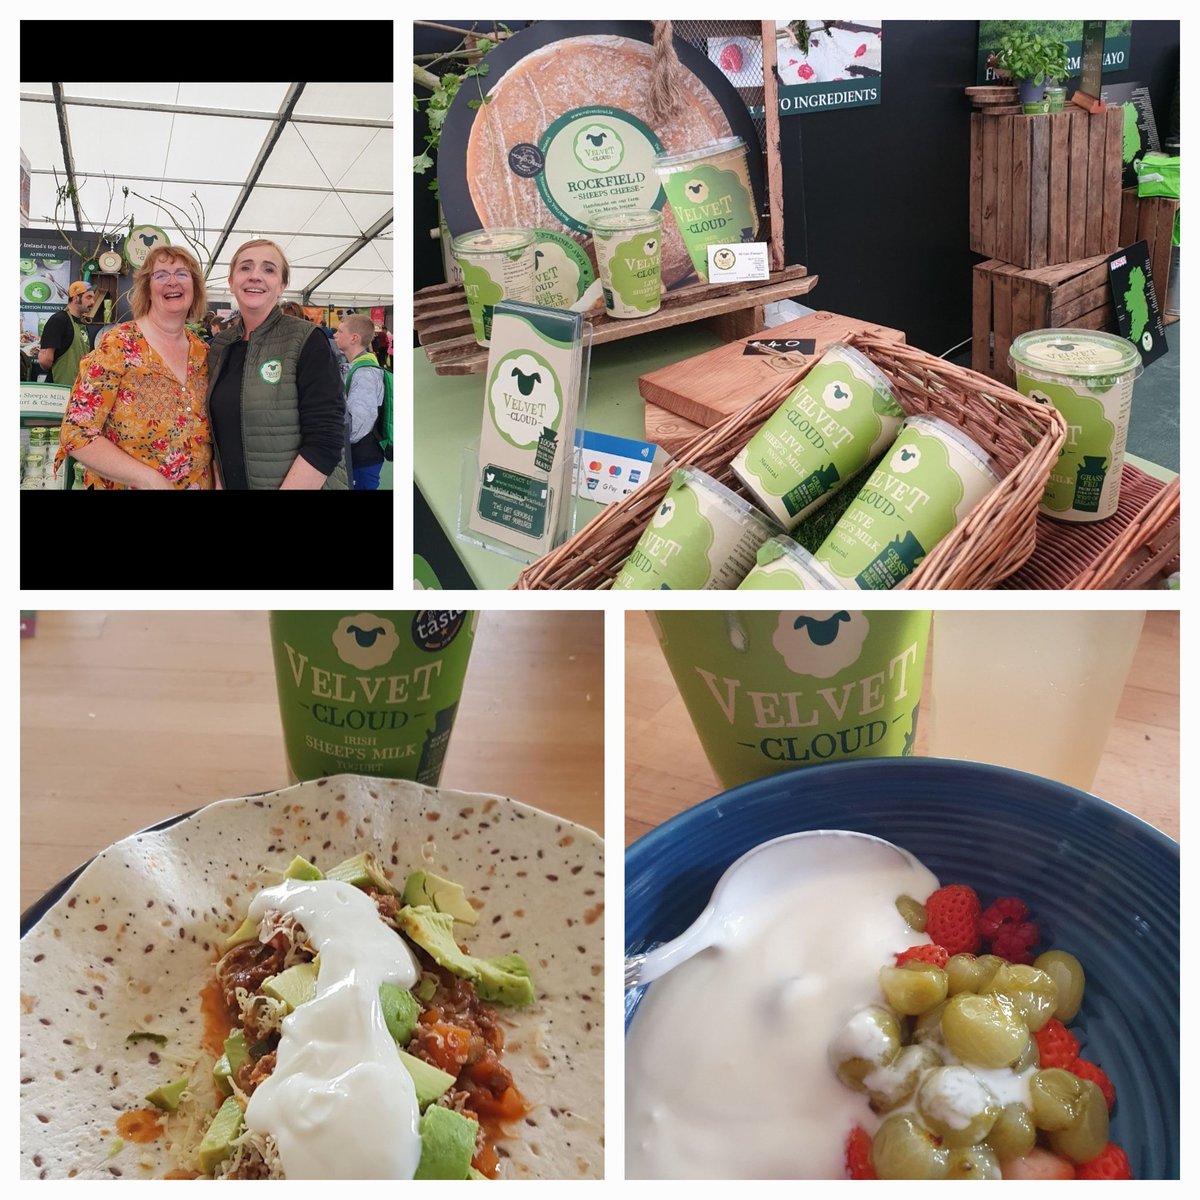 Day 4 meet the local producers.
Aisling, Michael and the shepherds @VelvetCloud_ie make the yummiest sheep's yogurt and cheese on their farm in Mayo. They also have fudge for Mothers day.   Hint,hint daughter darling 😄 #irishfoodproducers